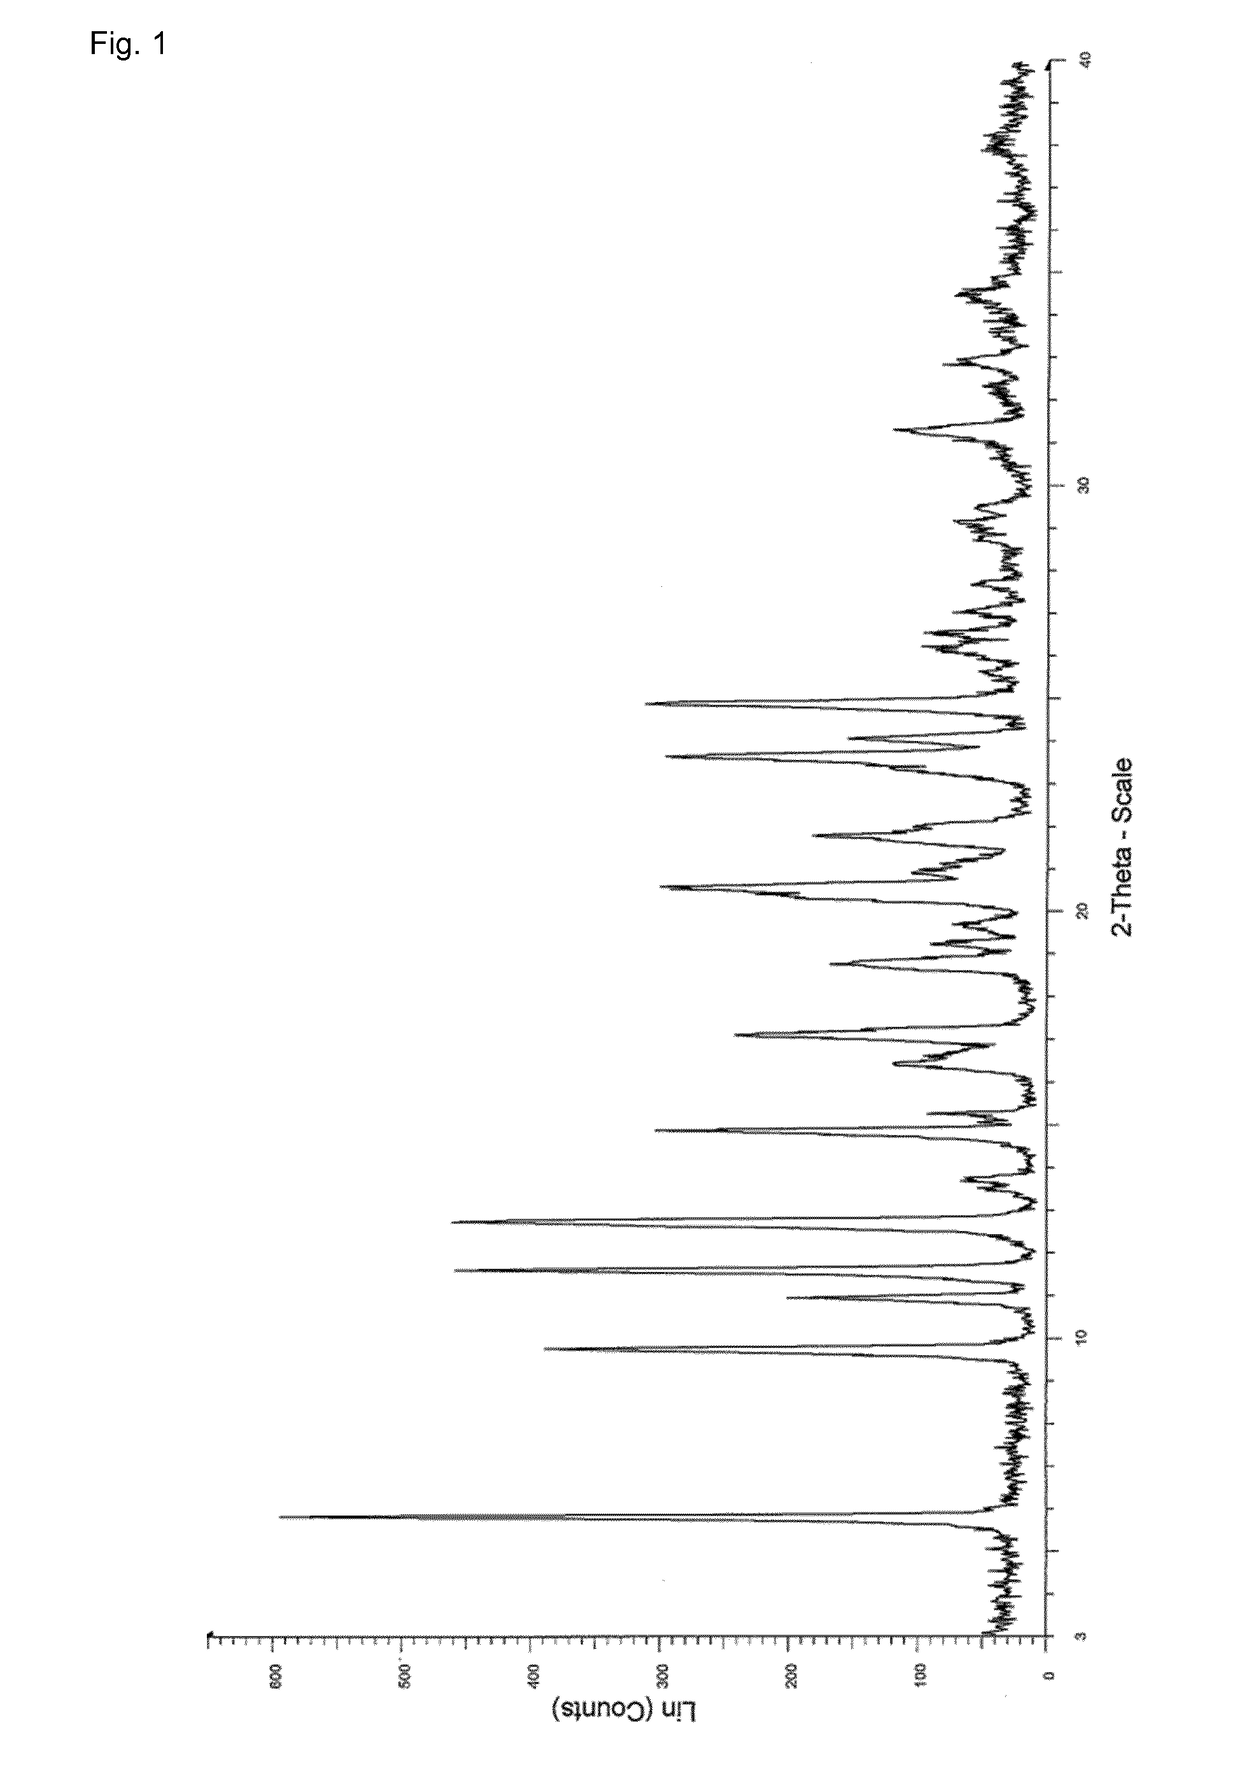 Process for the preparation of enclomiphene citrate having needle shaped crystal habit